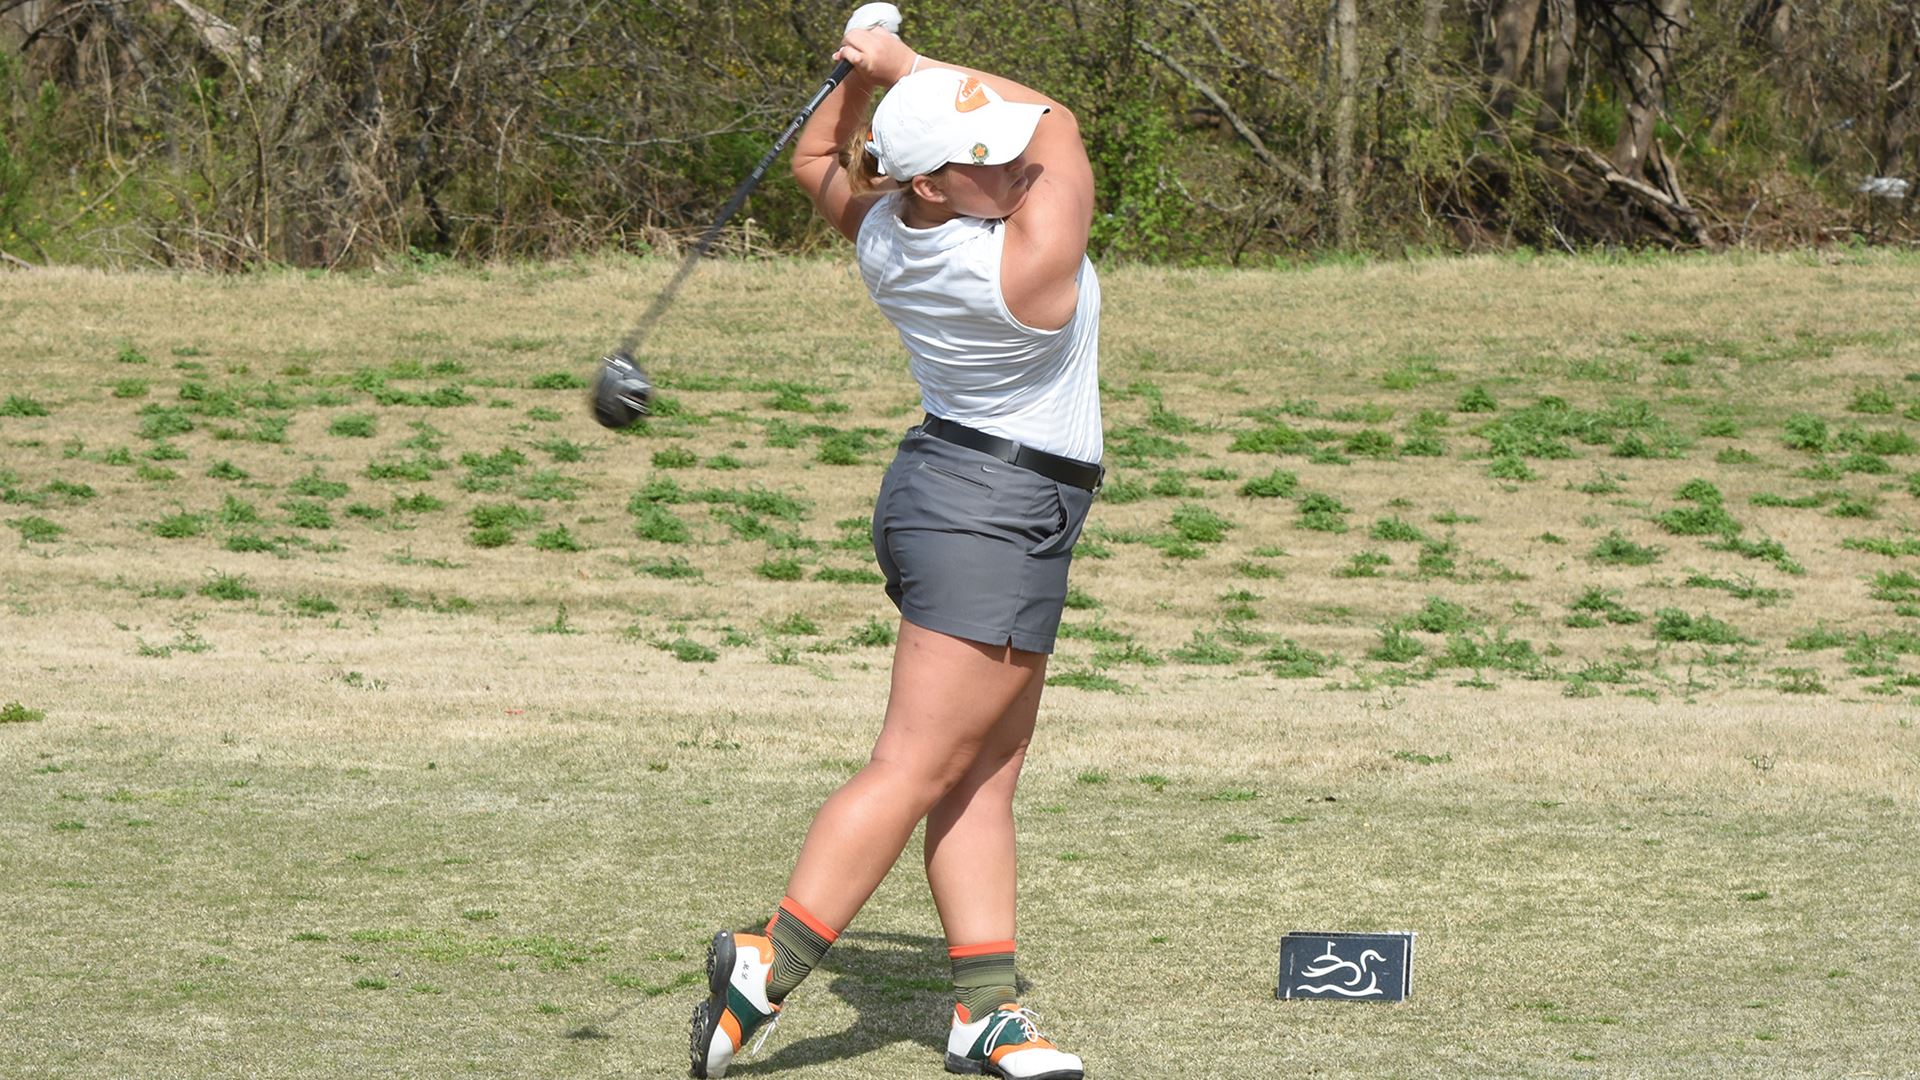 Bad weather leads to rough season opener for women’s golf